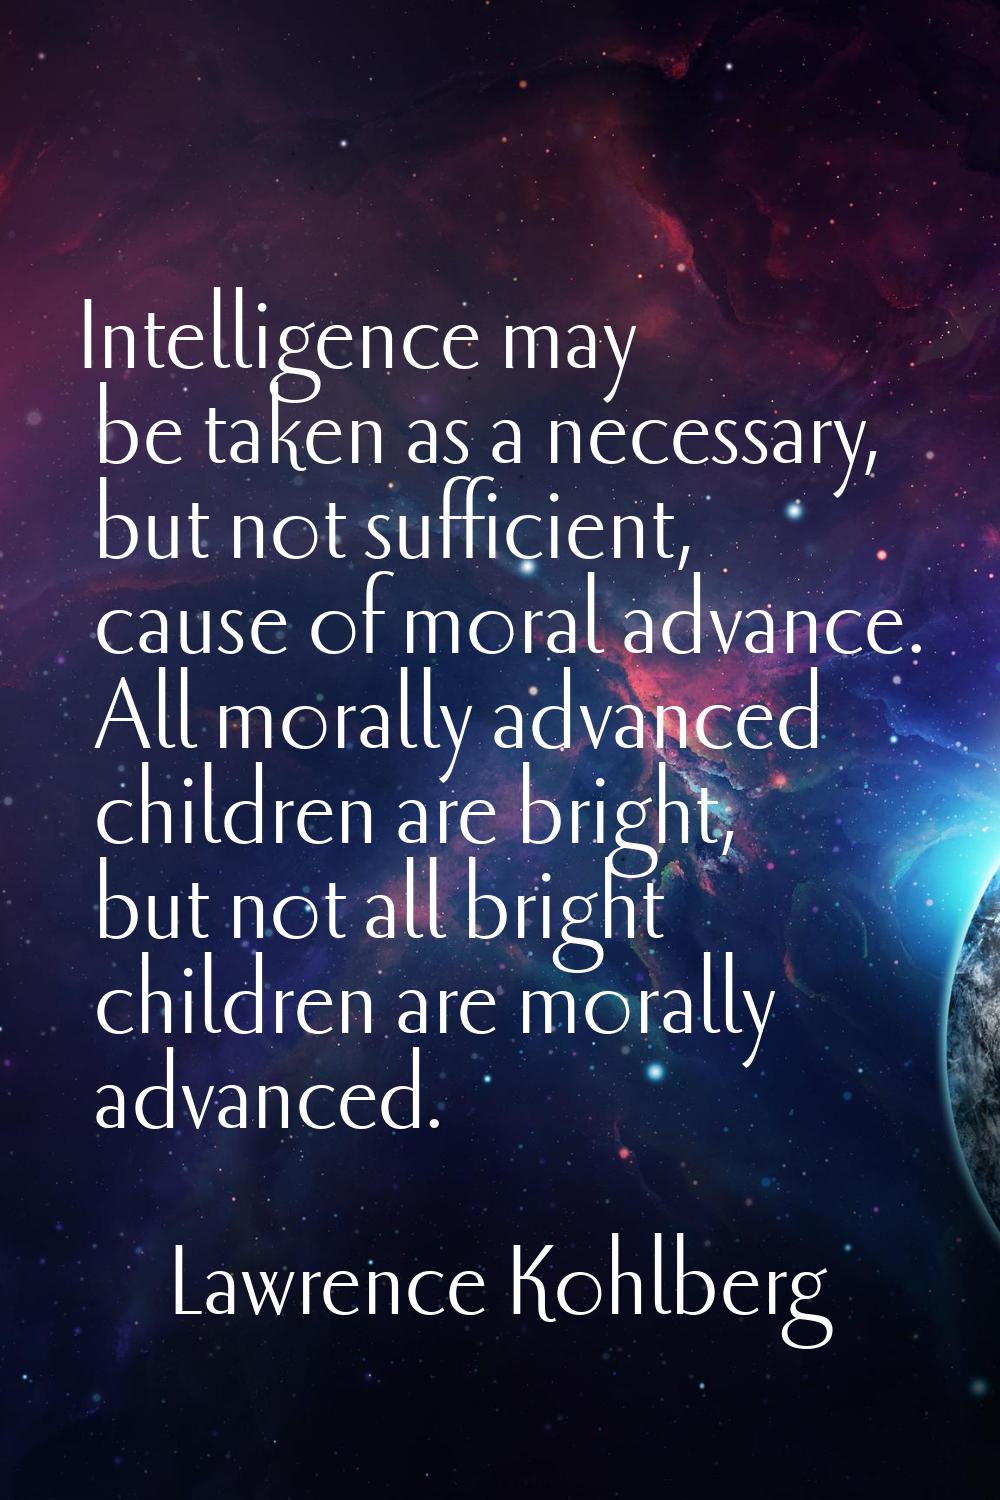 Intelligence may be taken as a necessary, but not sufficient, cause of moral advance. All morally a